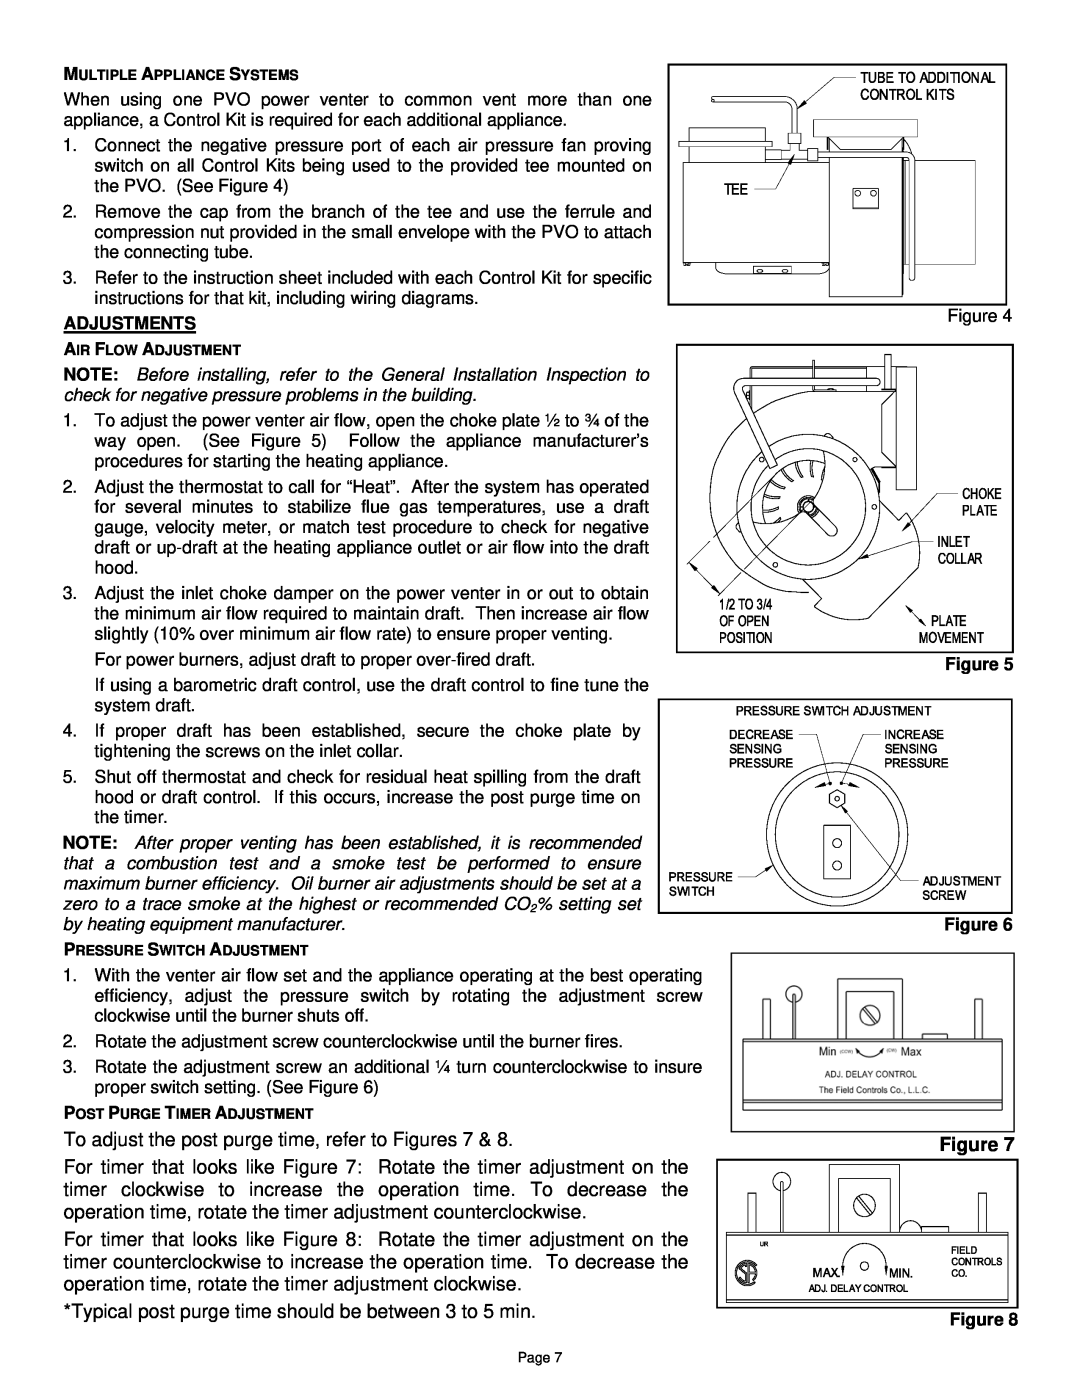 Field Controls PVO-300, PVO-600 specifications Adjustments, Figure Figure 